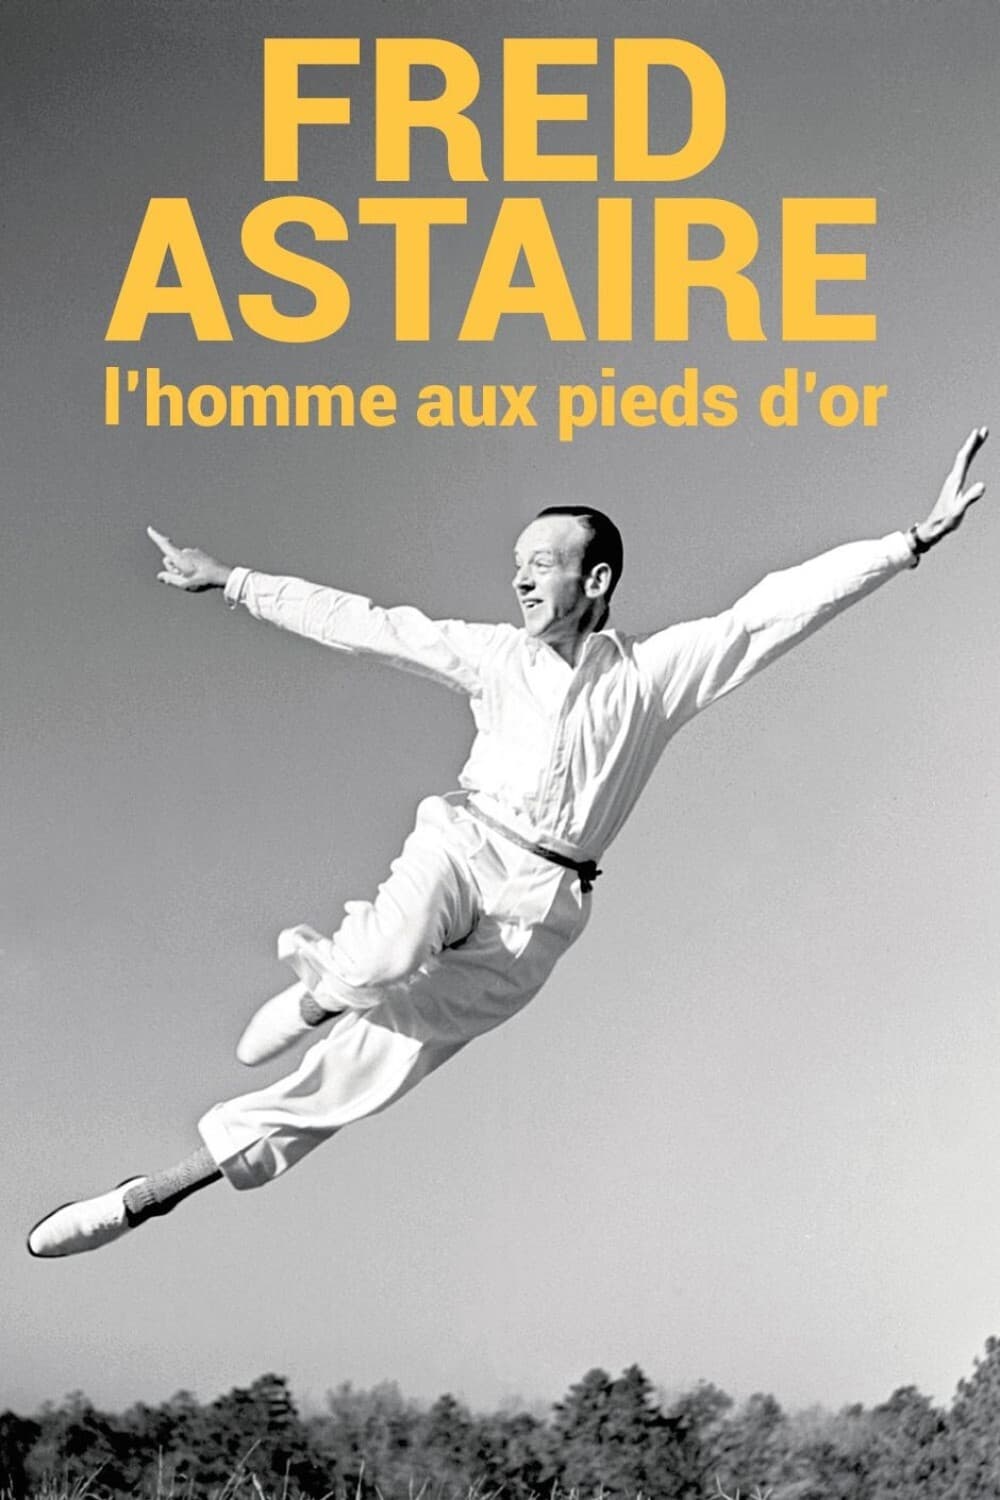 Fred Astaire, l'homme aux pieds d'or